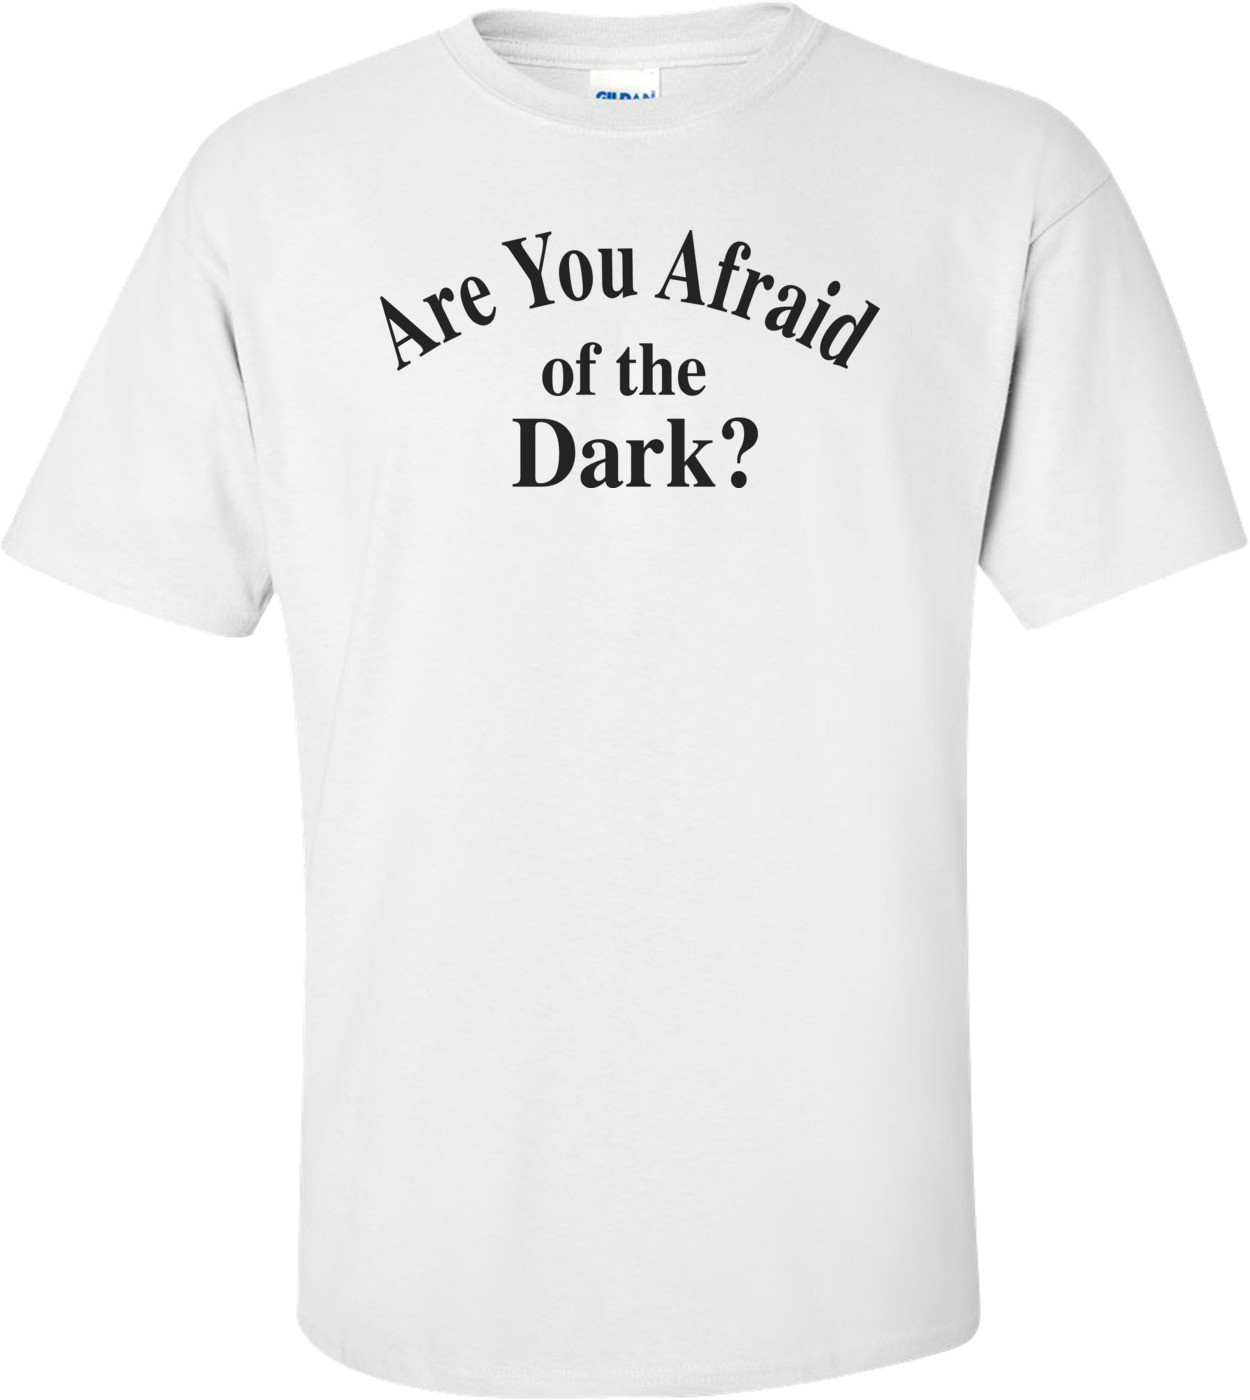 Are You Afraid Of The Dark? T-shirt